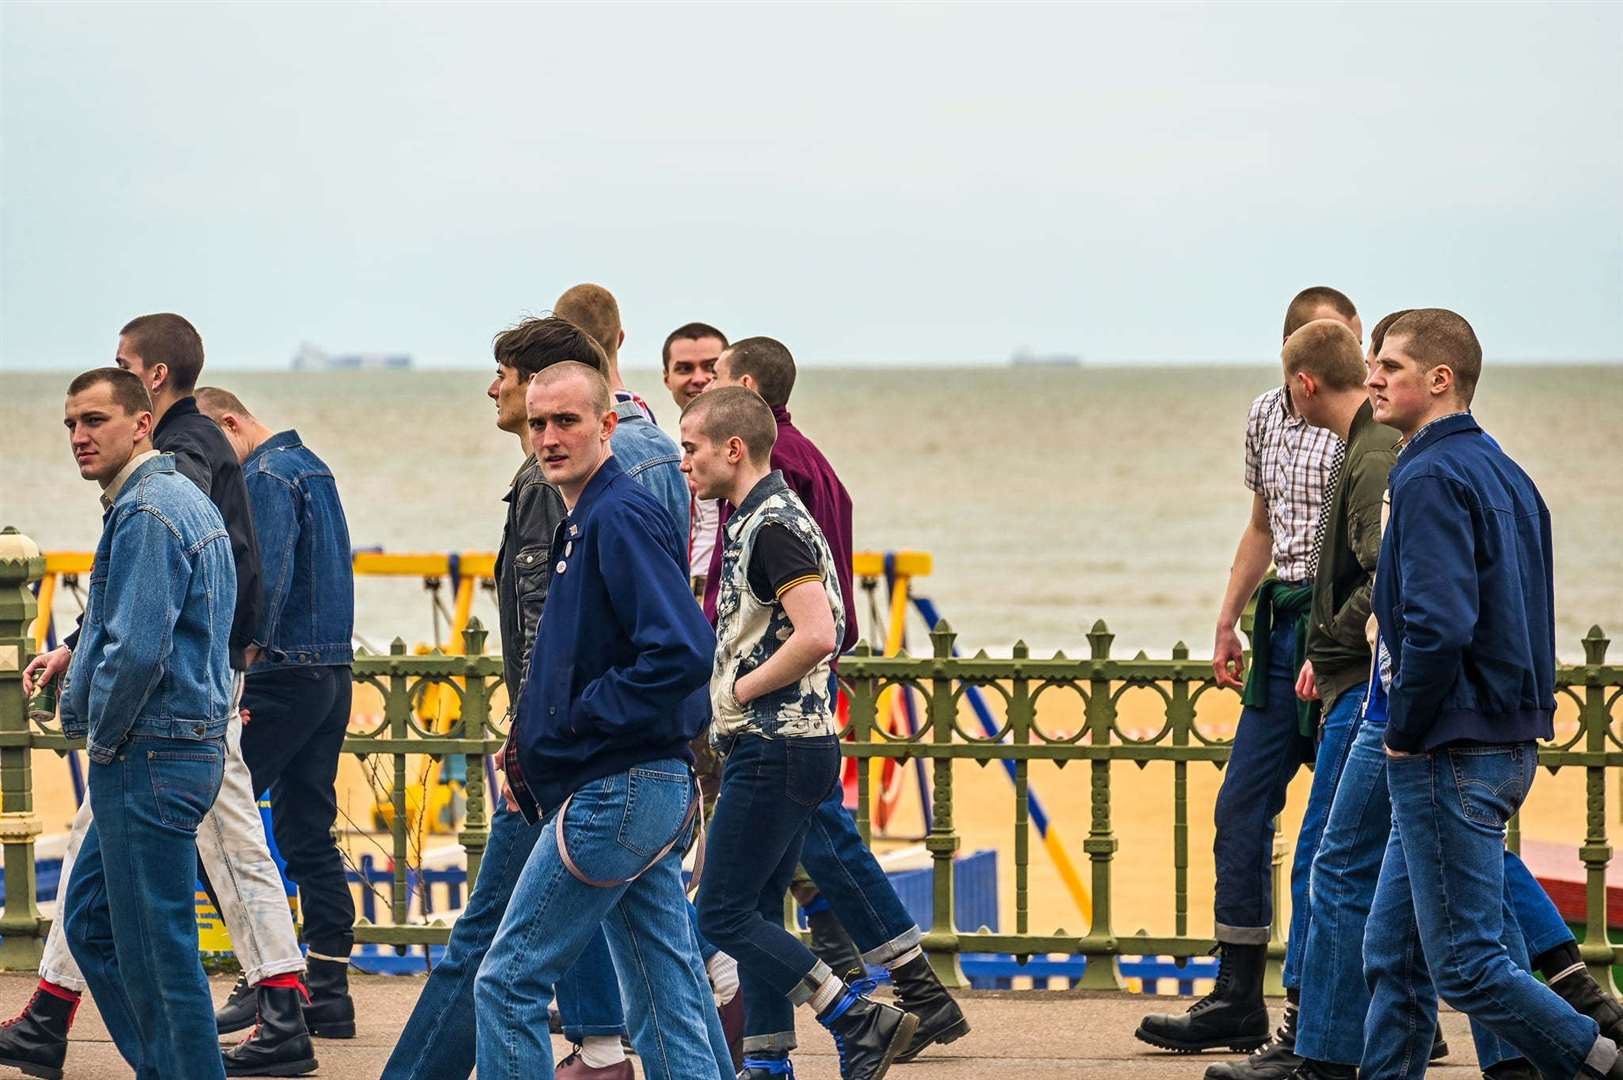 The skinheads in the film were seen targeting the cinema at Margate's Dreamland. Picture: Steven Collis Allfields Photography